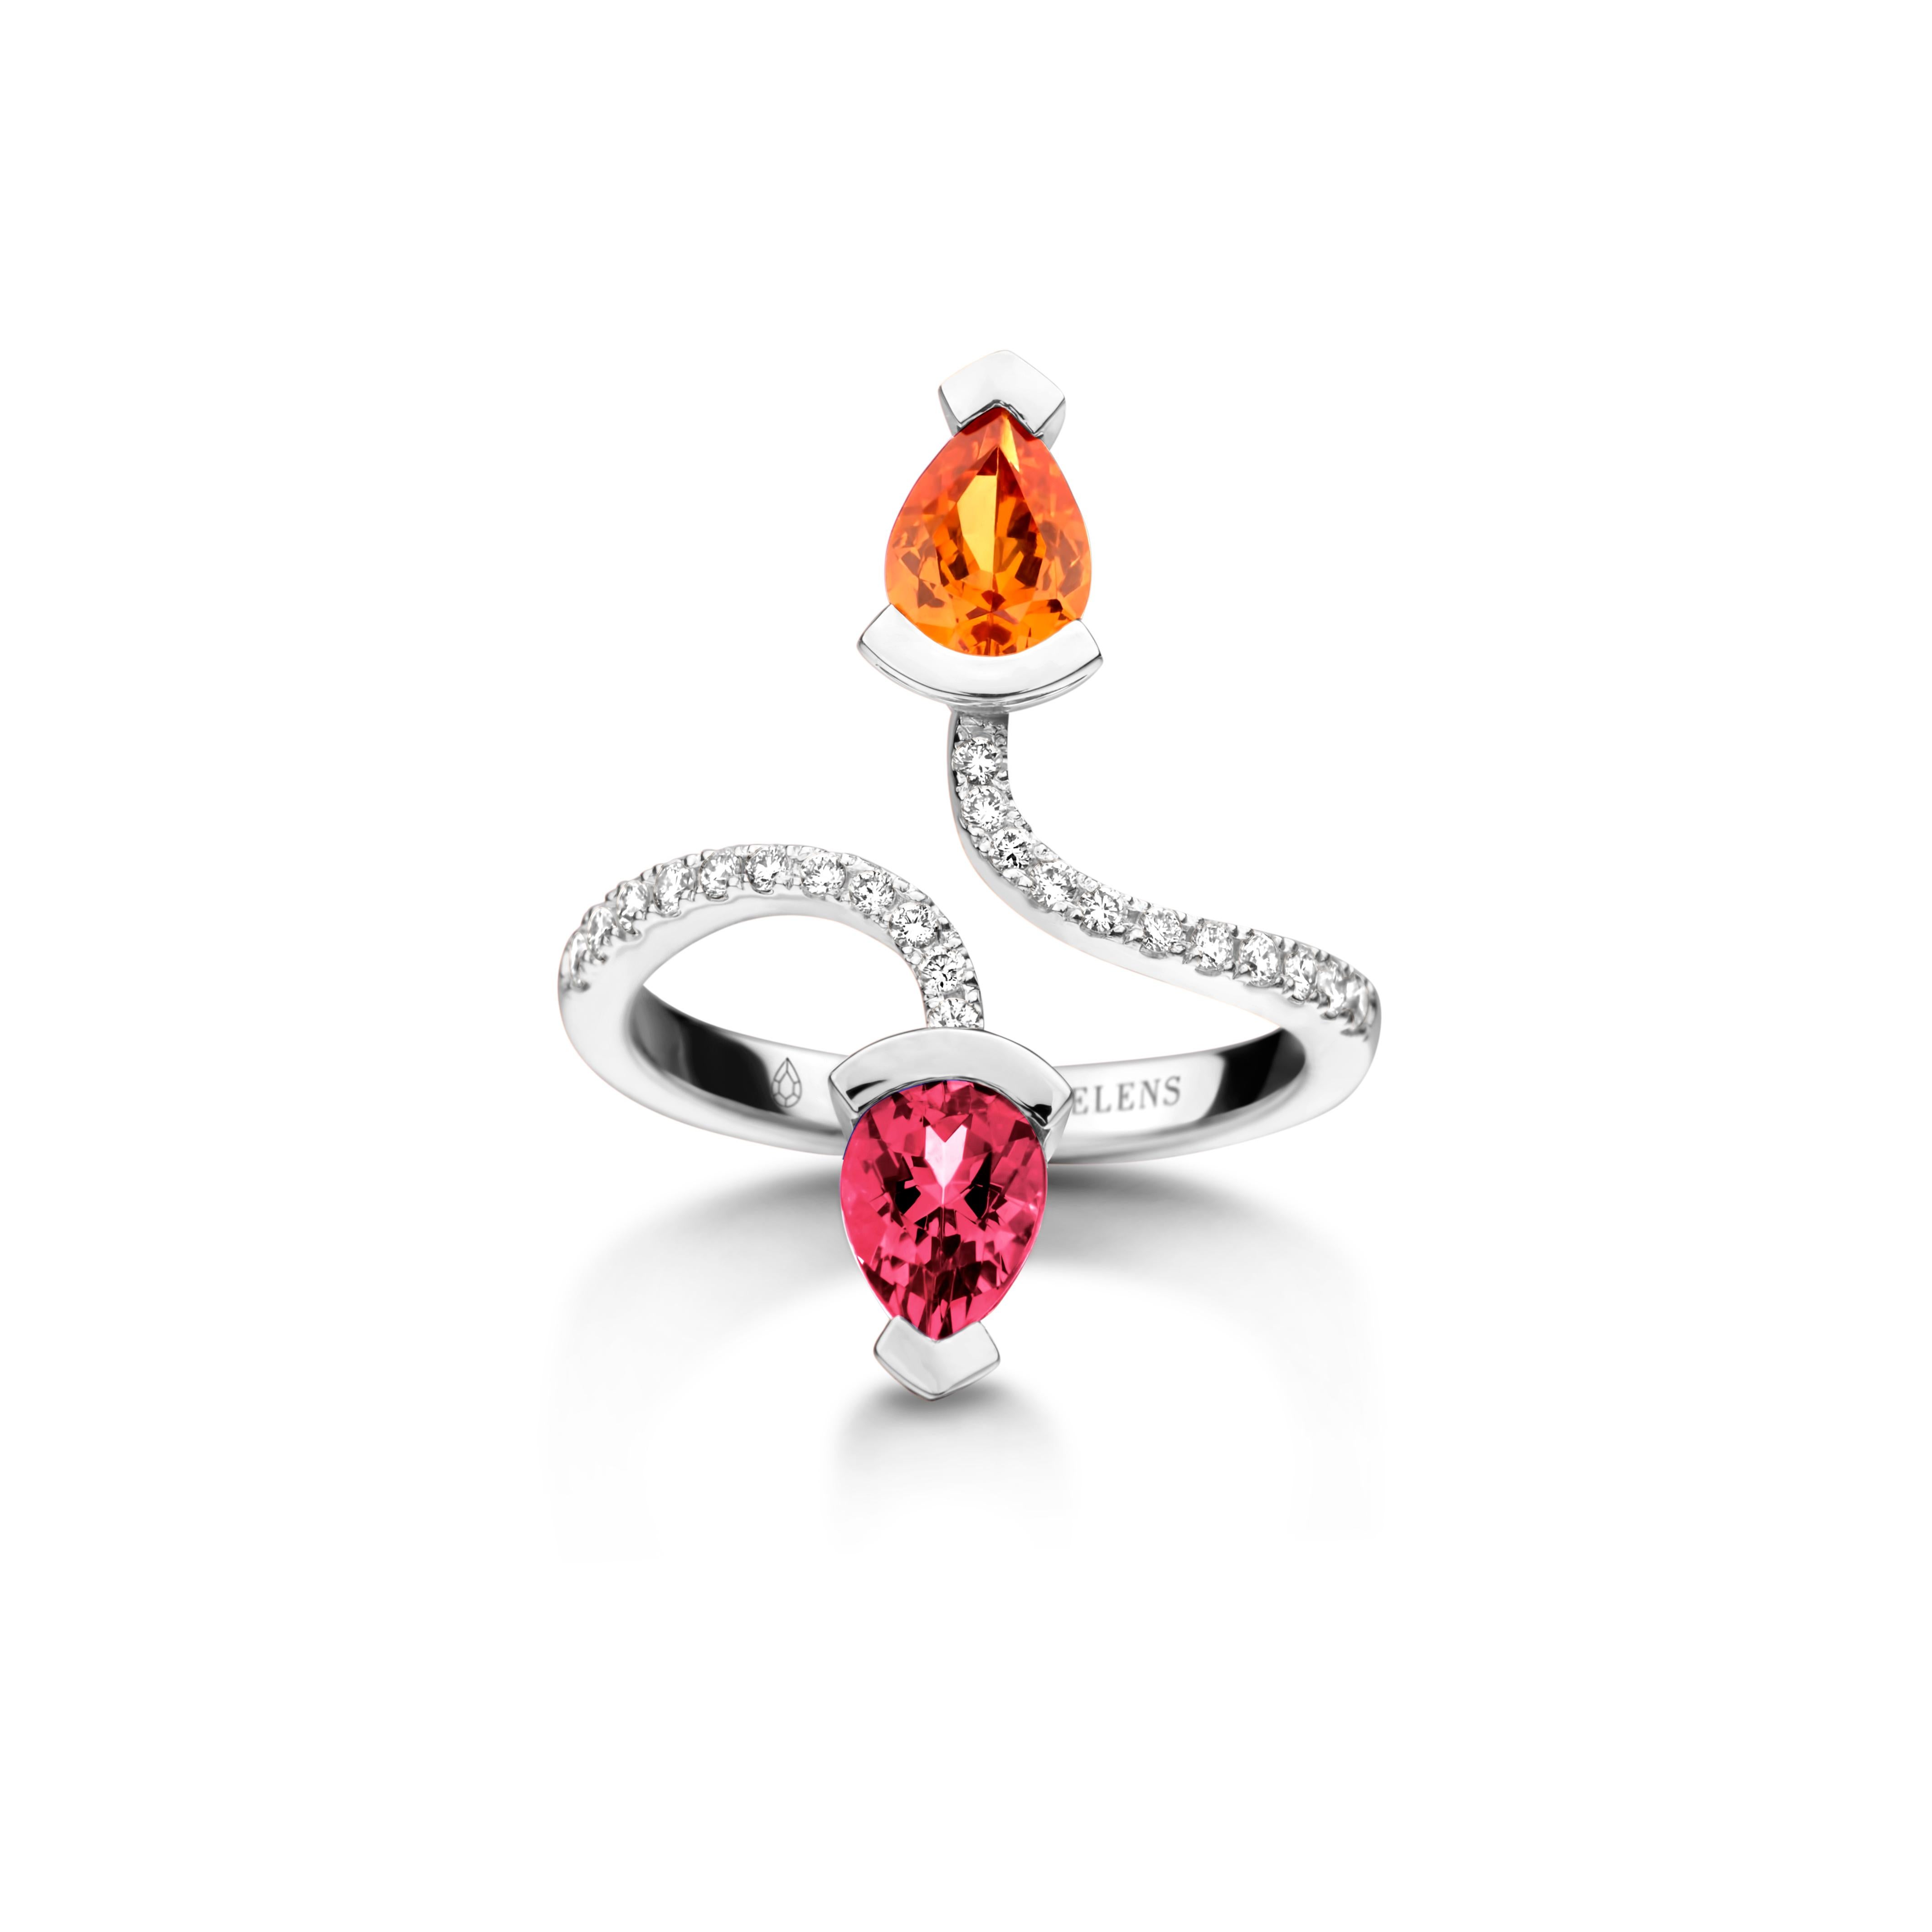 Contemporary Mandarin Garnet And Rubellite Yellow Gold Diamond Cocktail Ring For Sale